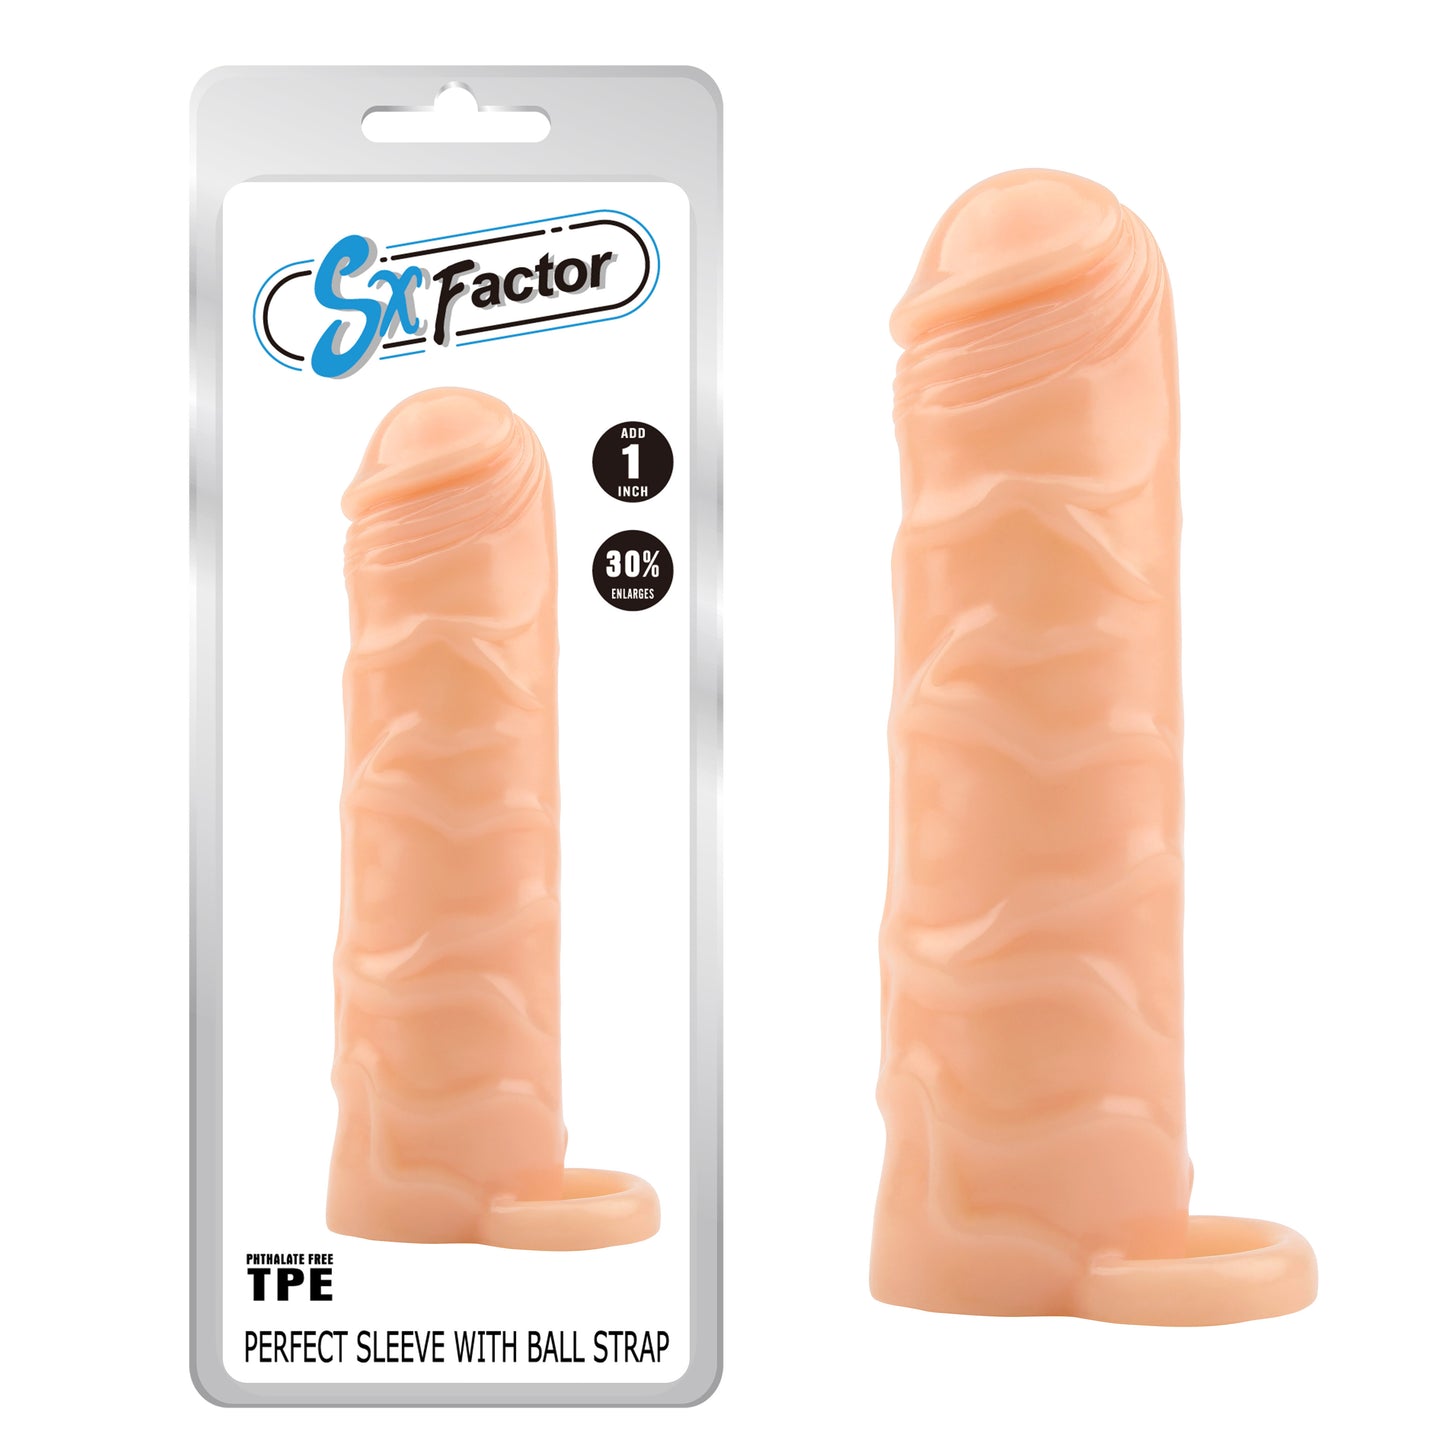 SX Factor - Perfect Sleeve With Ball Strap | Penis Sleeve